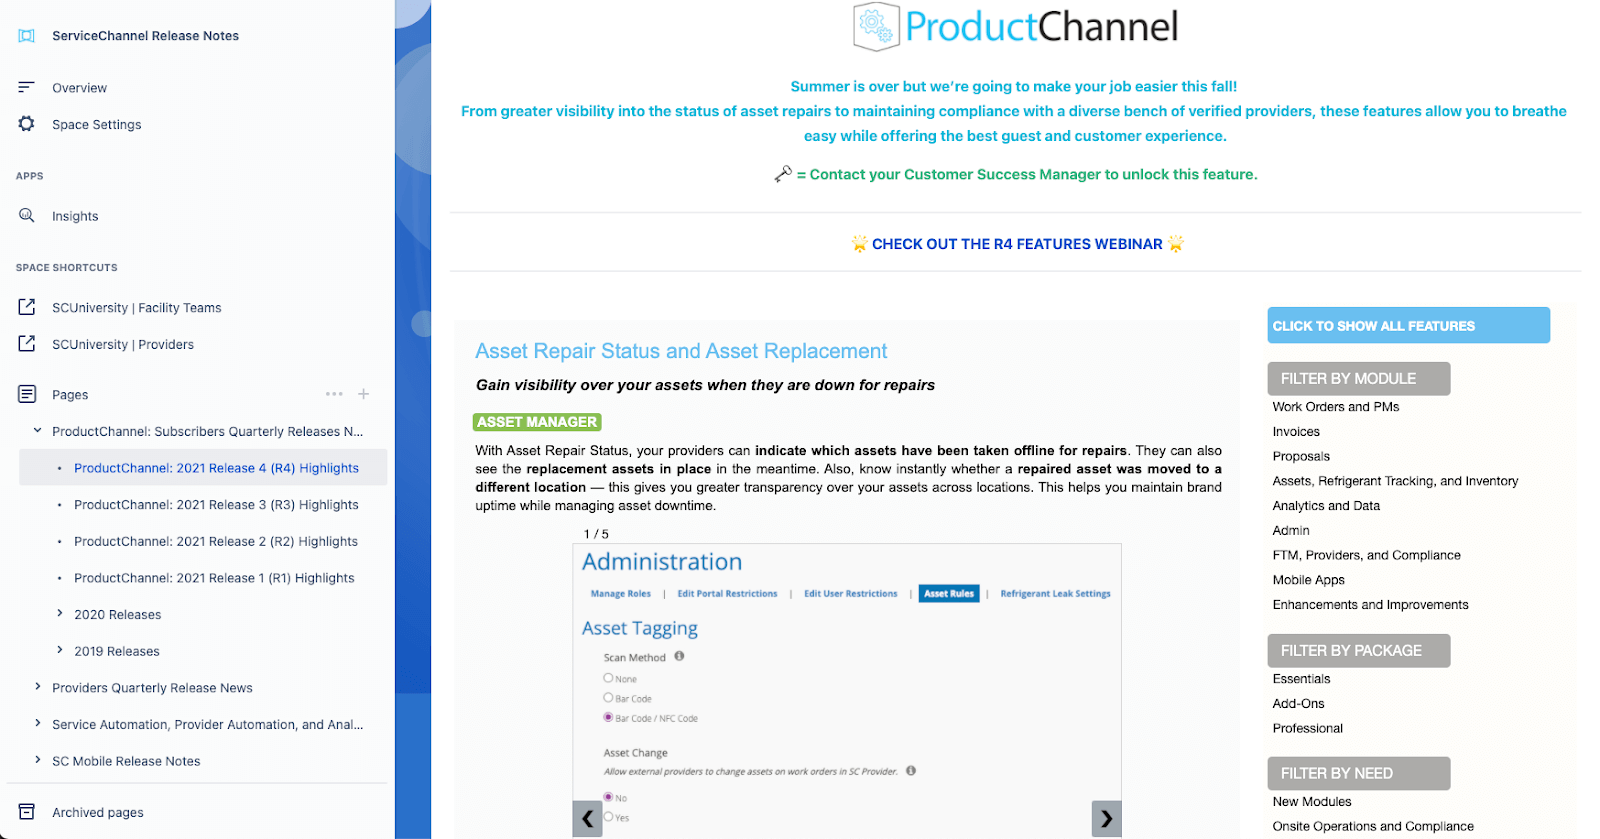 Service Channel release notes